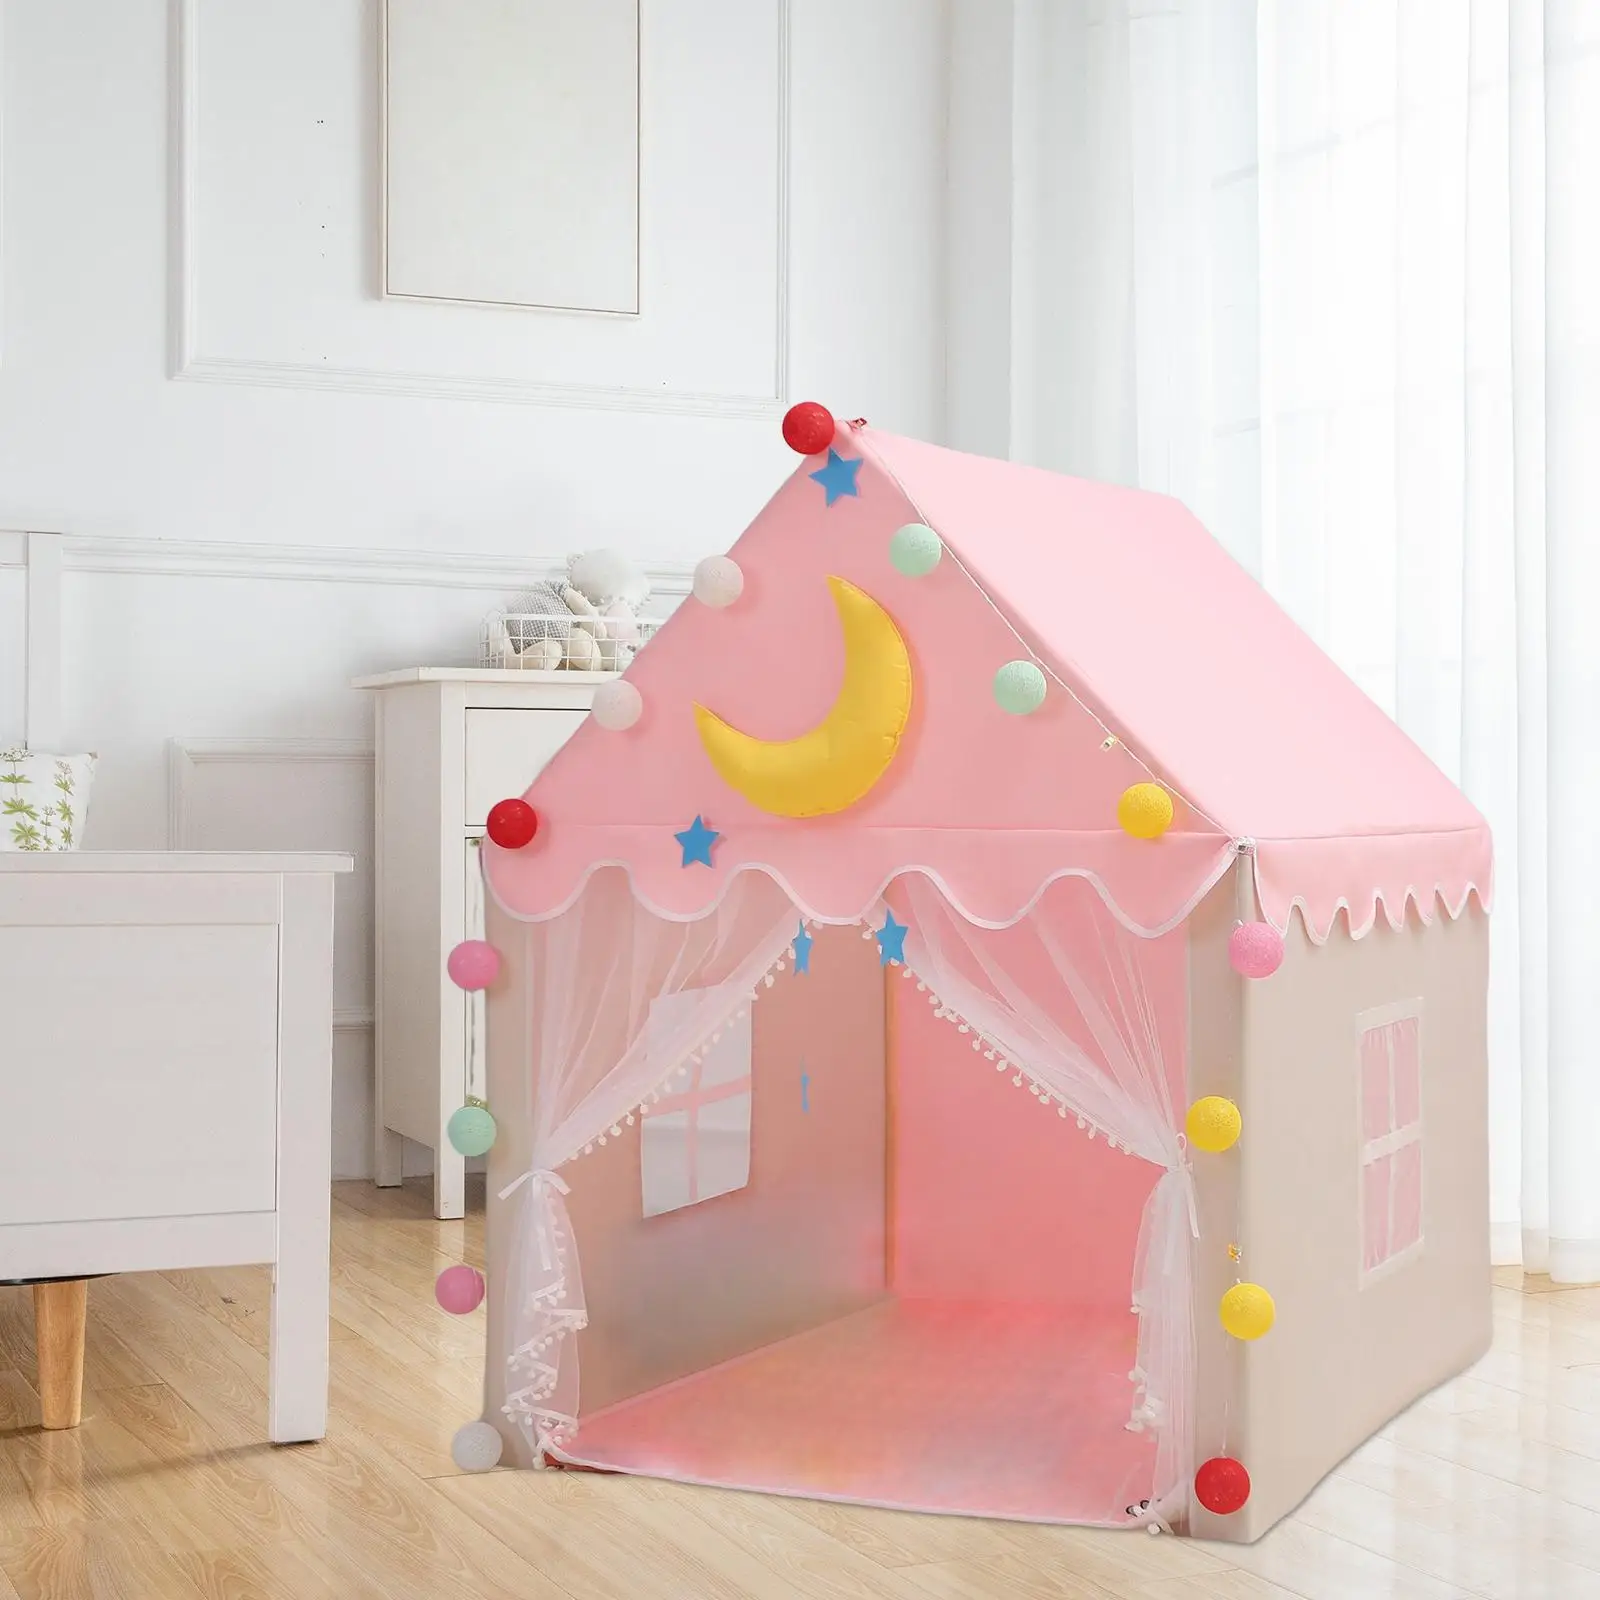 Playhouse Tent Toy Camping Play Tent Playroom Indoor Outdoor Playhouse Tent for Girls Kids Toddlers Boys Holiday Gift